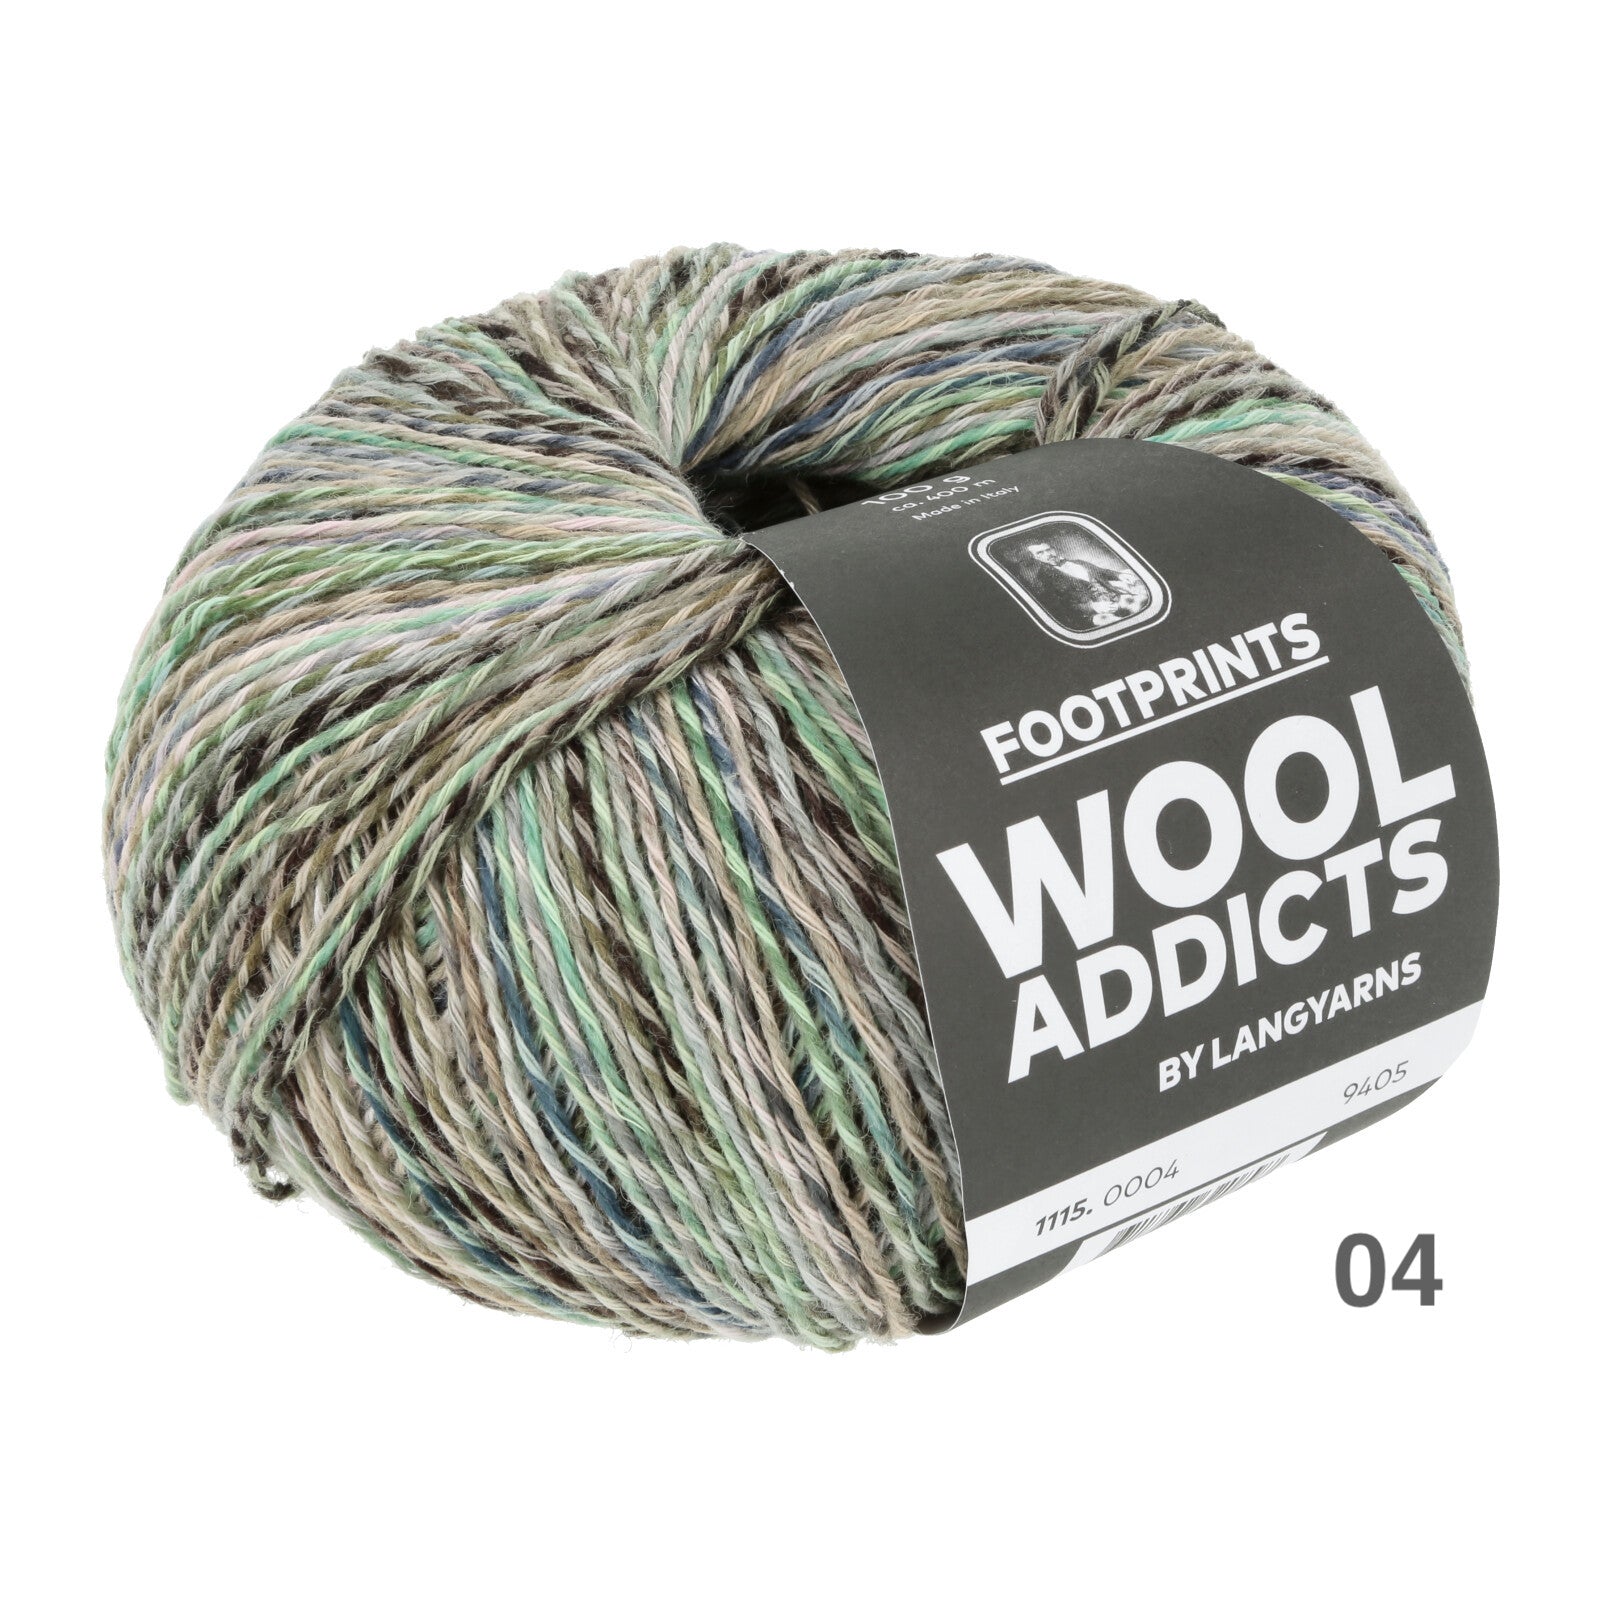 Footprints by Wool Addicts color 04